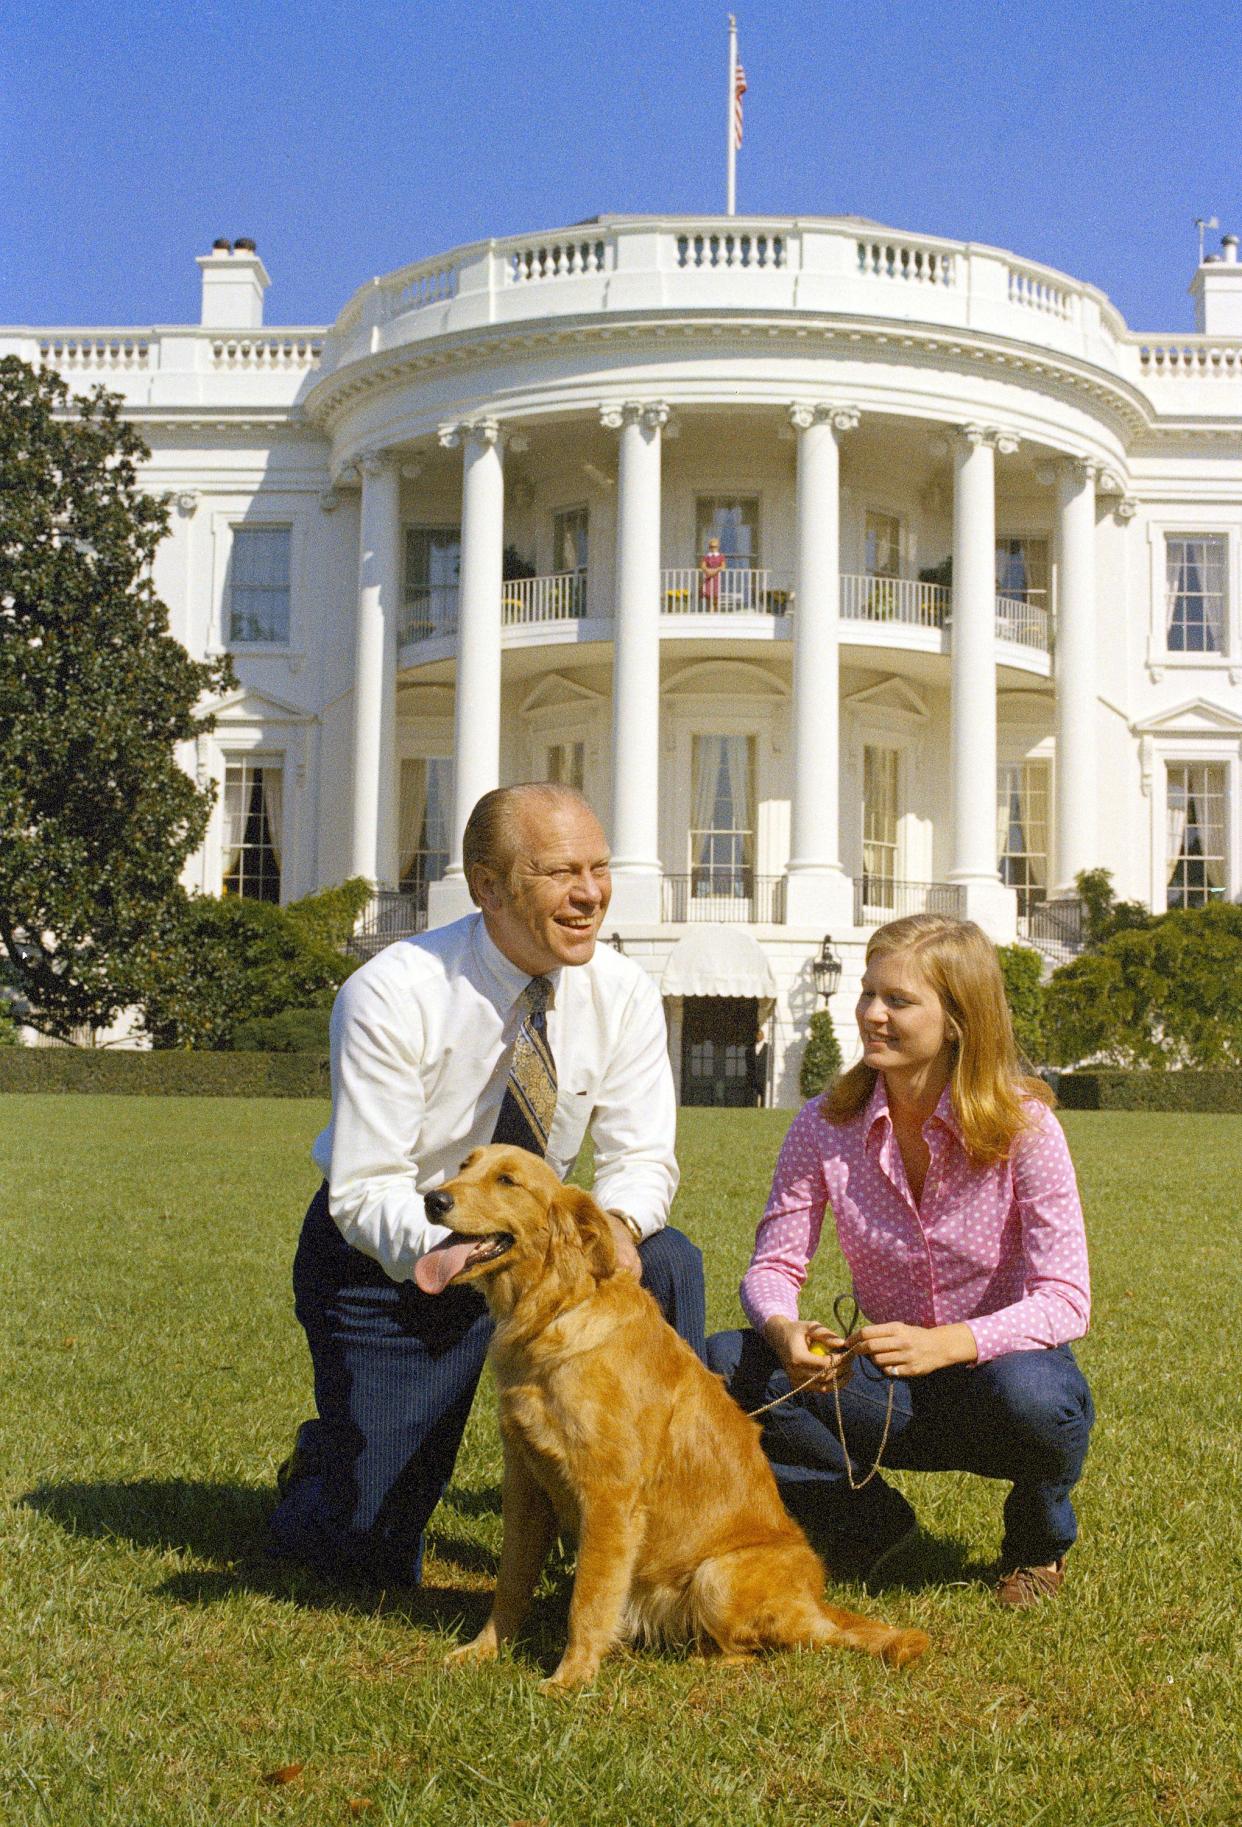 In this Oct. 7, 1974, file photo President Gerald Ford and his daughter, Susan, are seen on the South Lawn of the White House with their dog, Liberty, in Washington. The arrival of the Biden pets will also mark the next chapter in a long history of pets residing at the White House after a four-year hiatus during the Trump administration. (AP Photo, File)